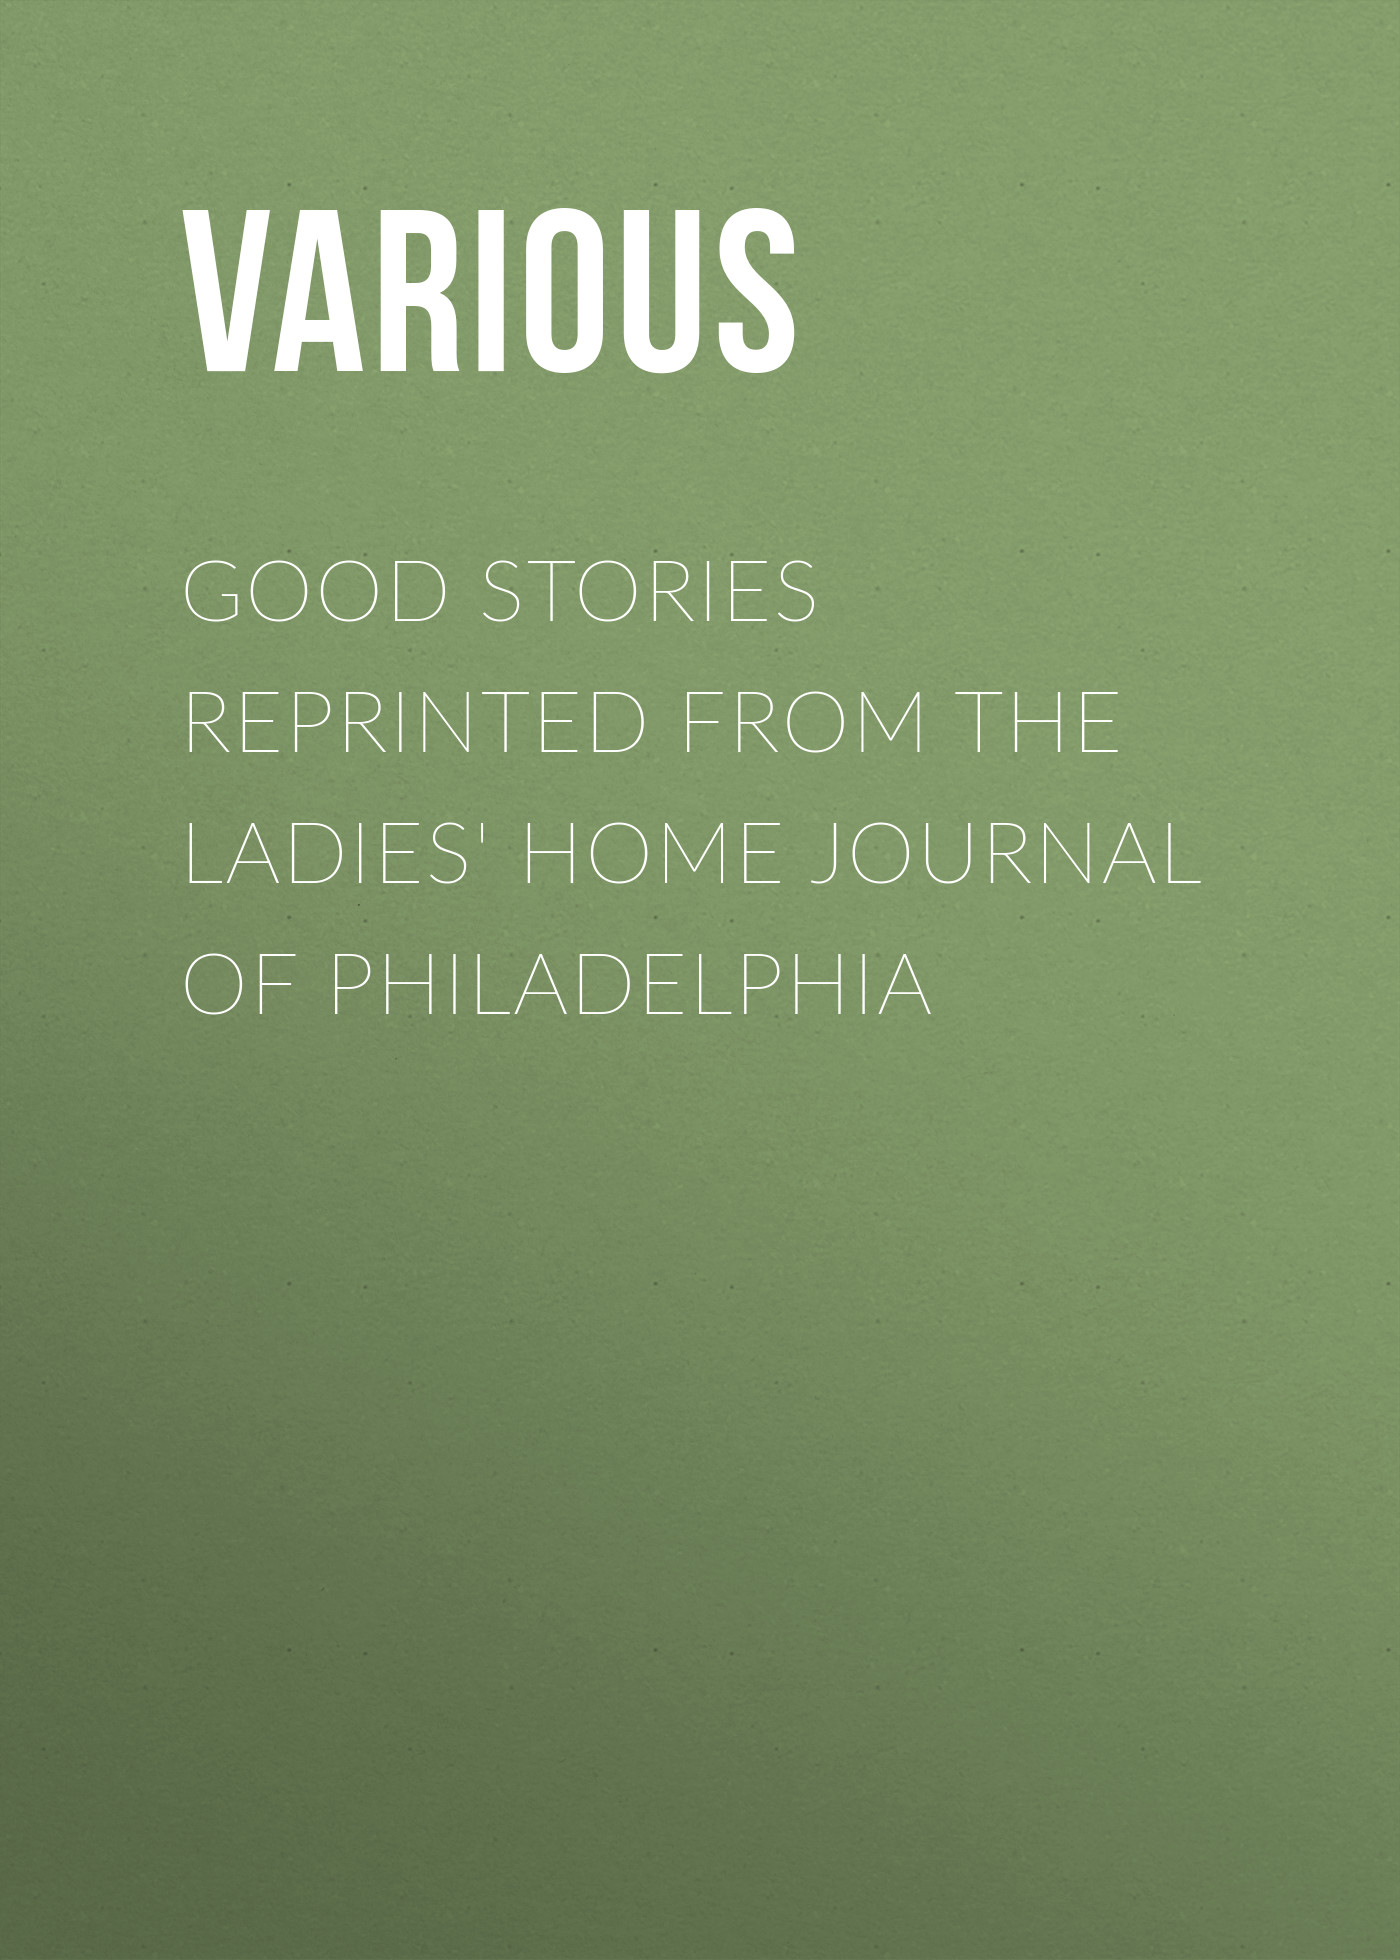 Good Stories Reprinted from the Ladies'Home Journal of Philadelphia